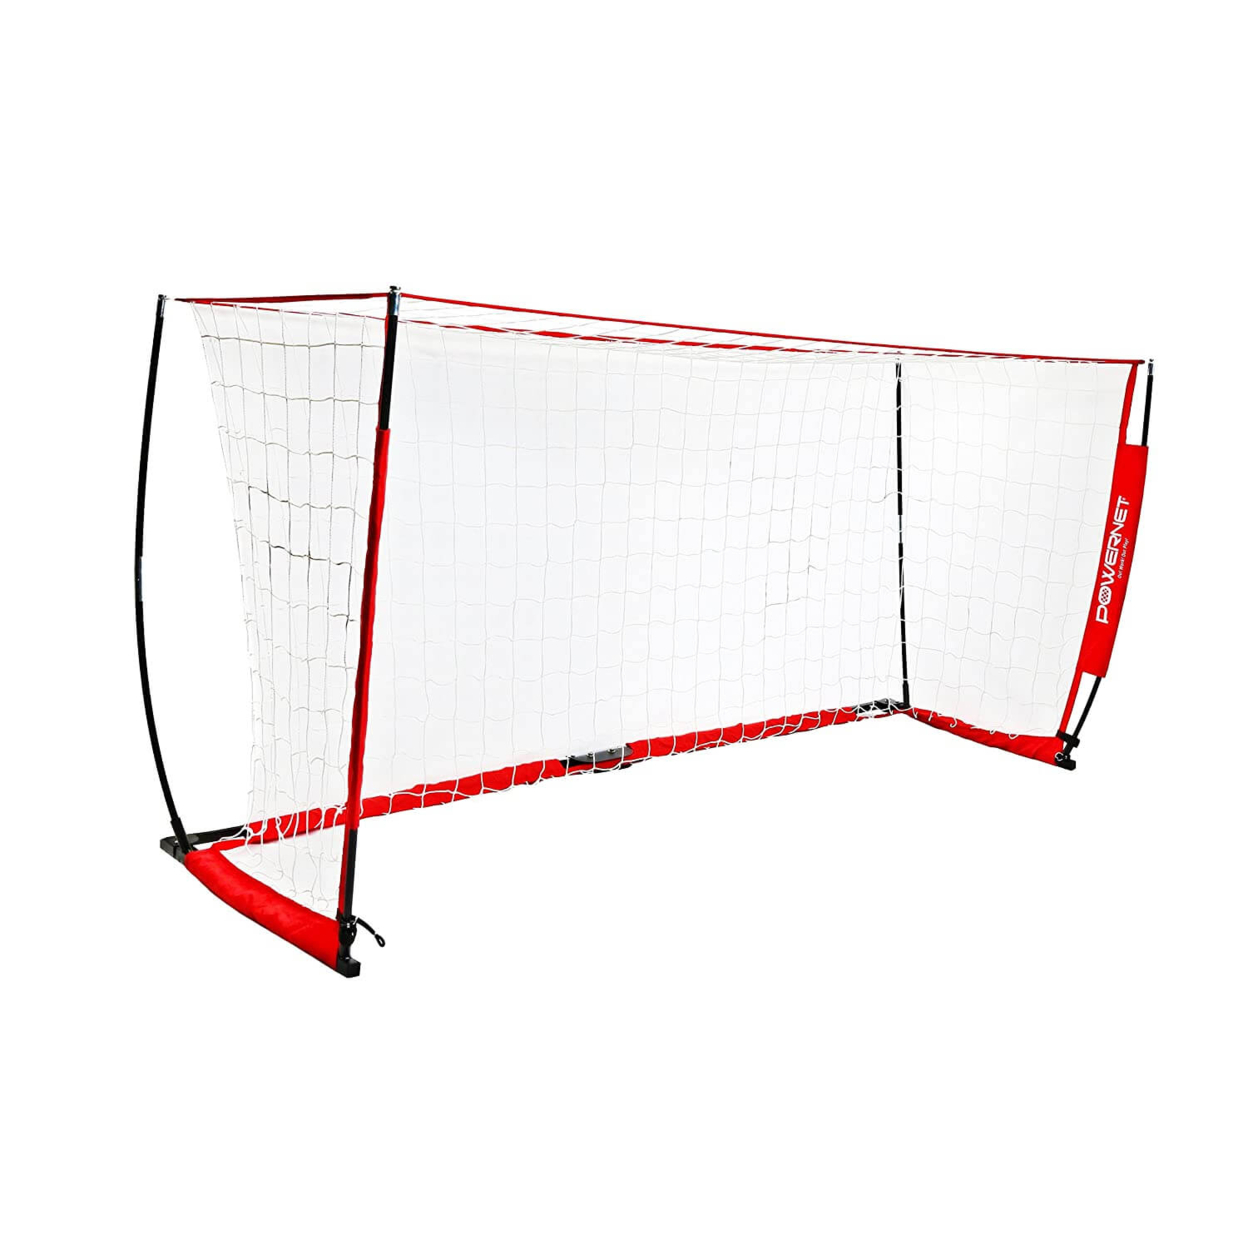 PowerNet Soccer Goal 14x7 Portable Instant Collapsible Bow Style Net + Wheeled Carry Bag